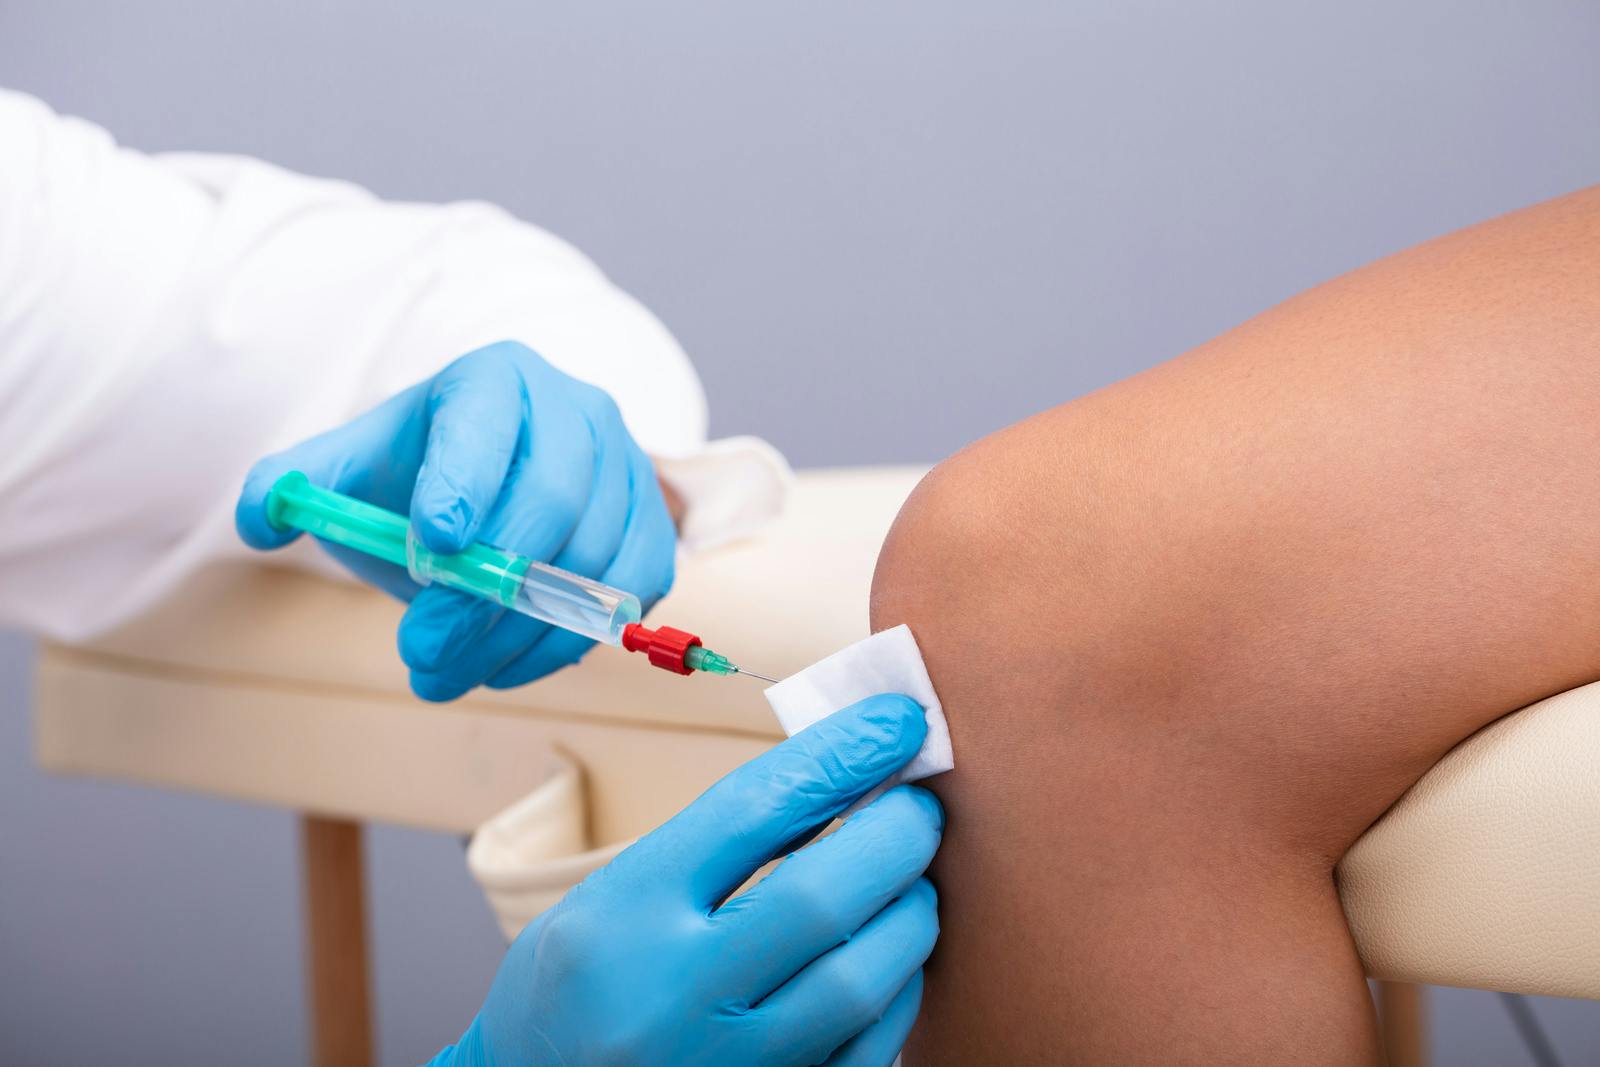 Cortisone shots into the knee